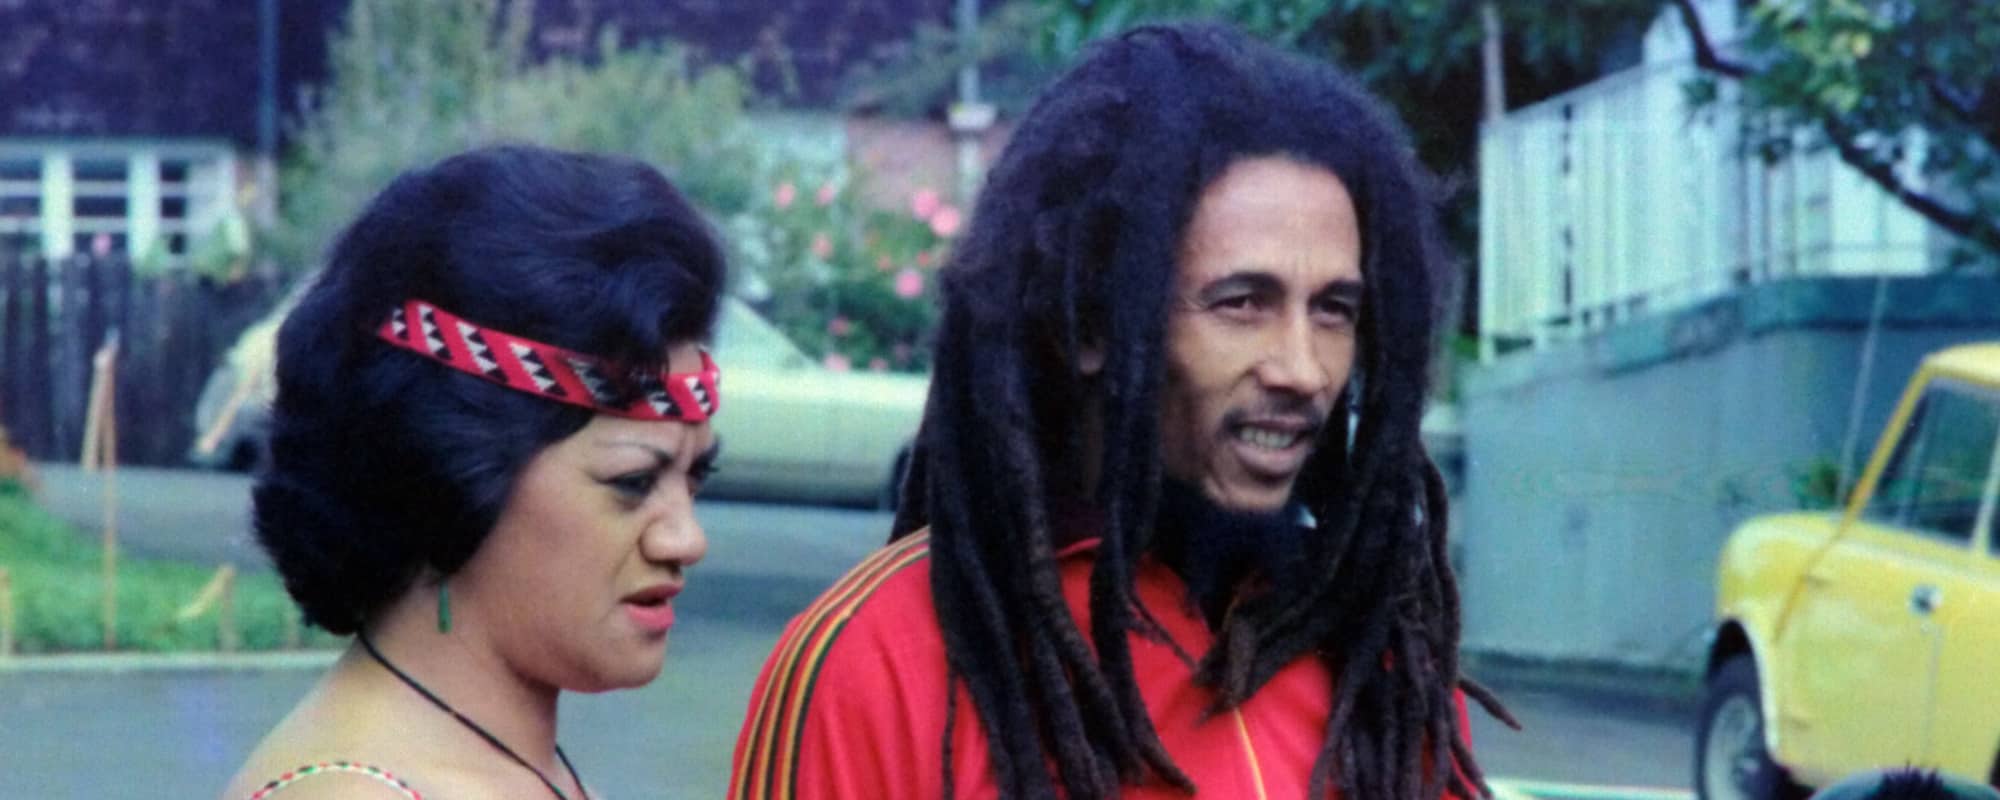 What If Bob Marley Had Defeated Cancer and Had Lived Twenty More Years?